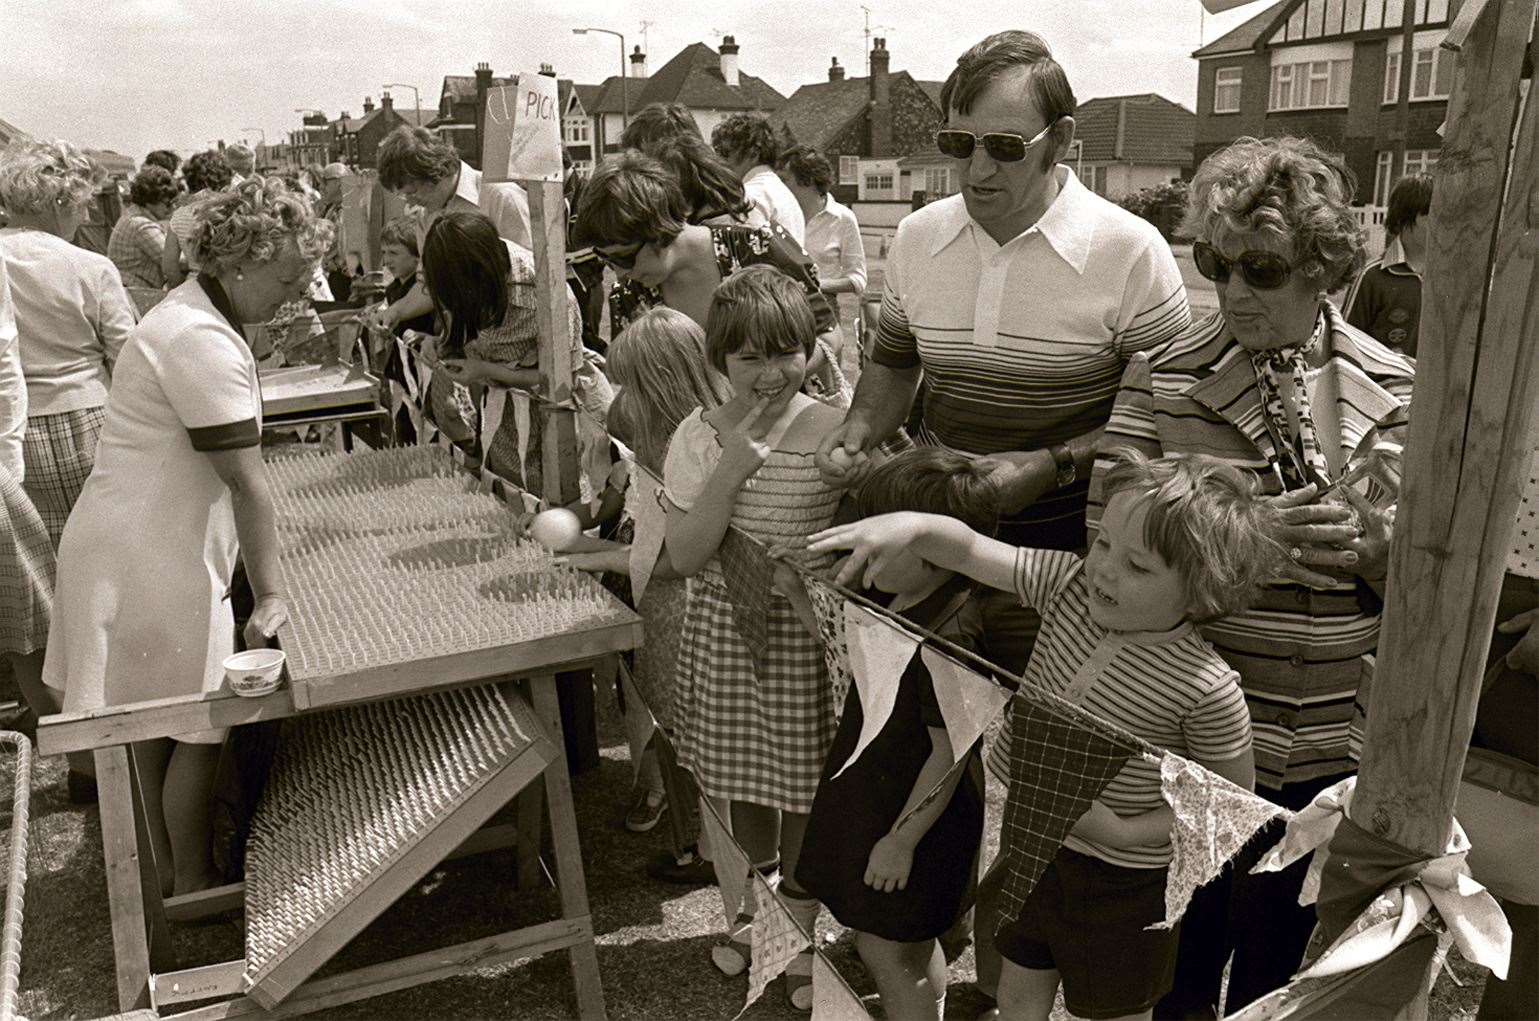 Families enjoy the stalls at Whitstable Regatta in 1978